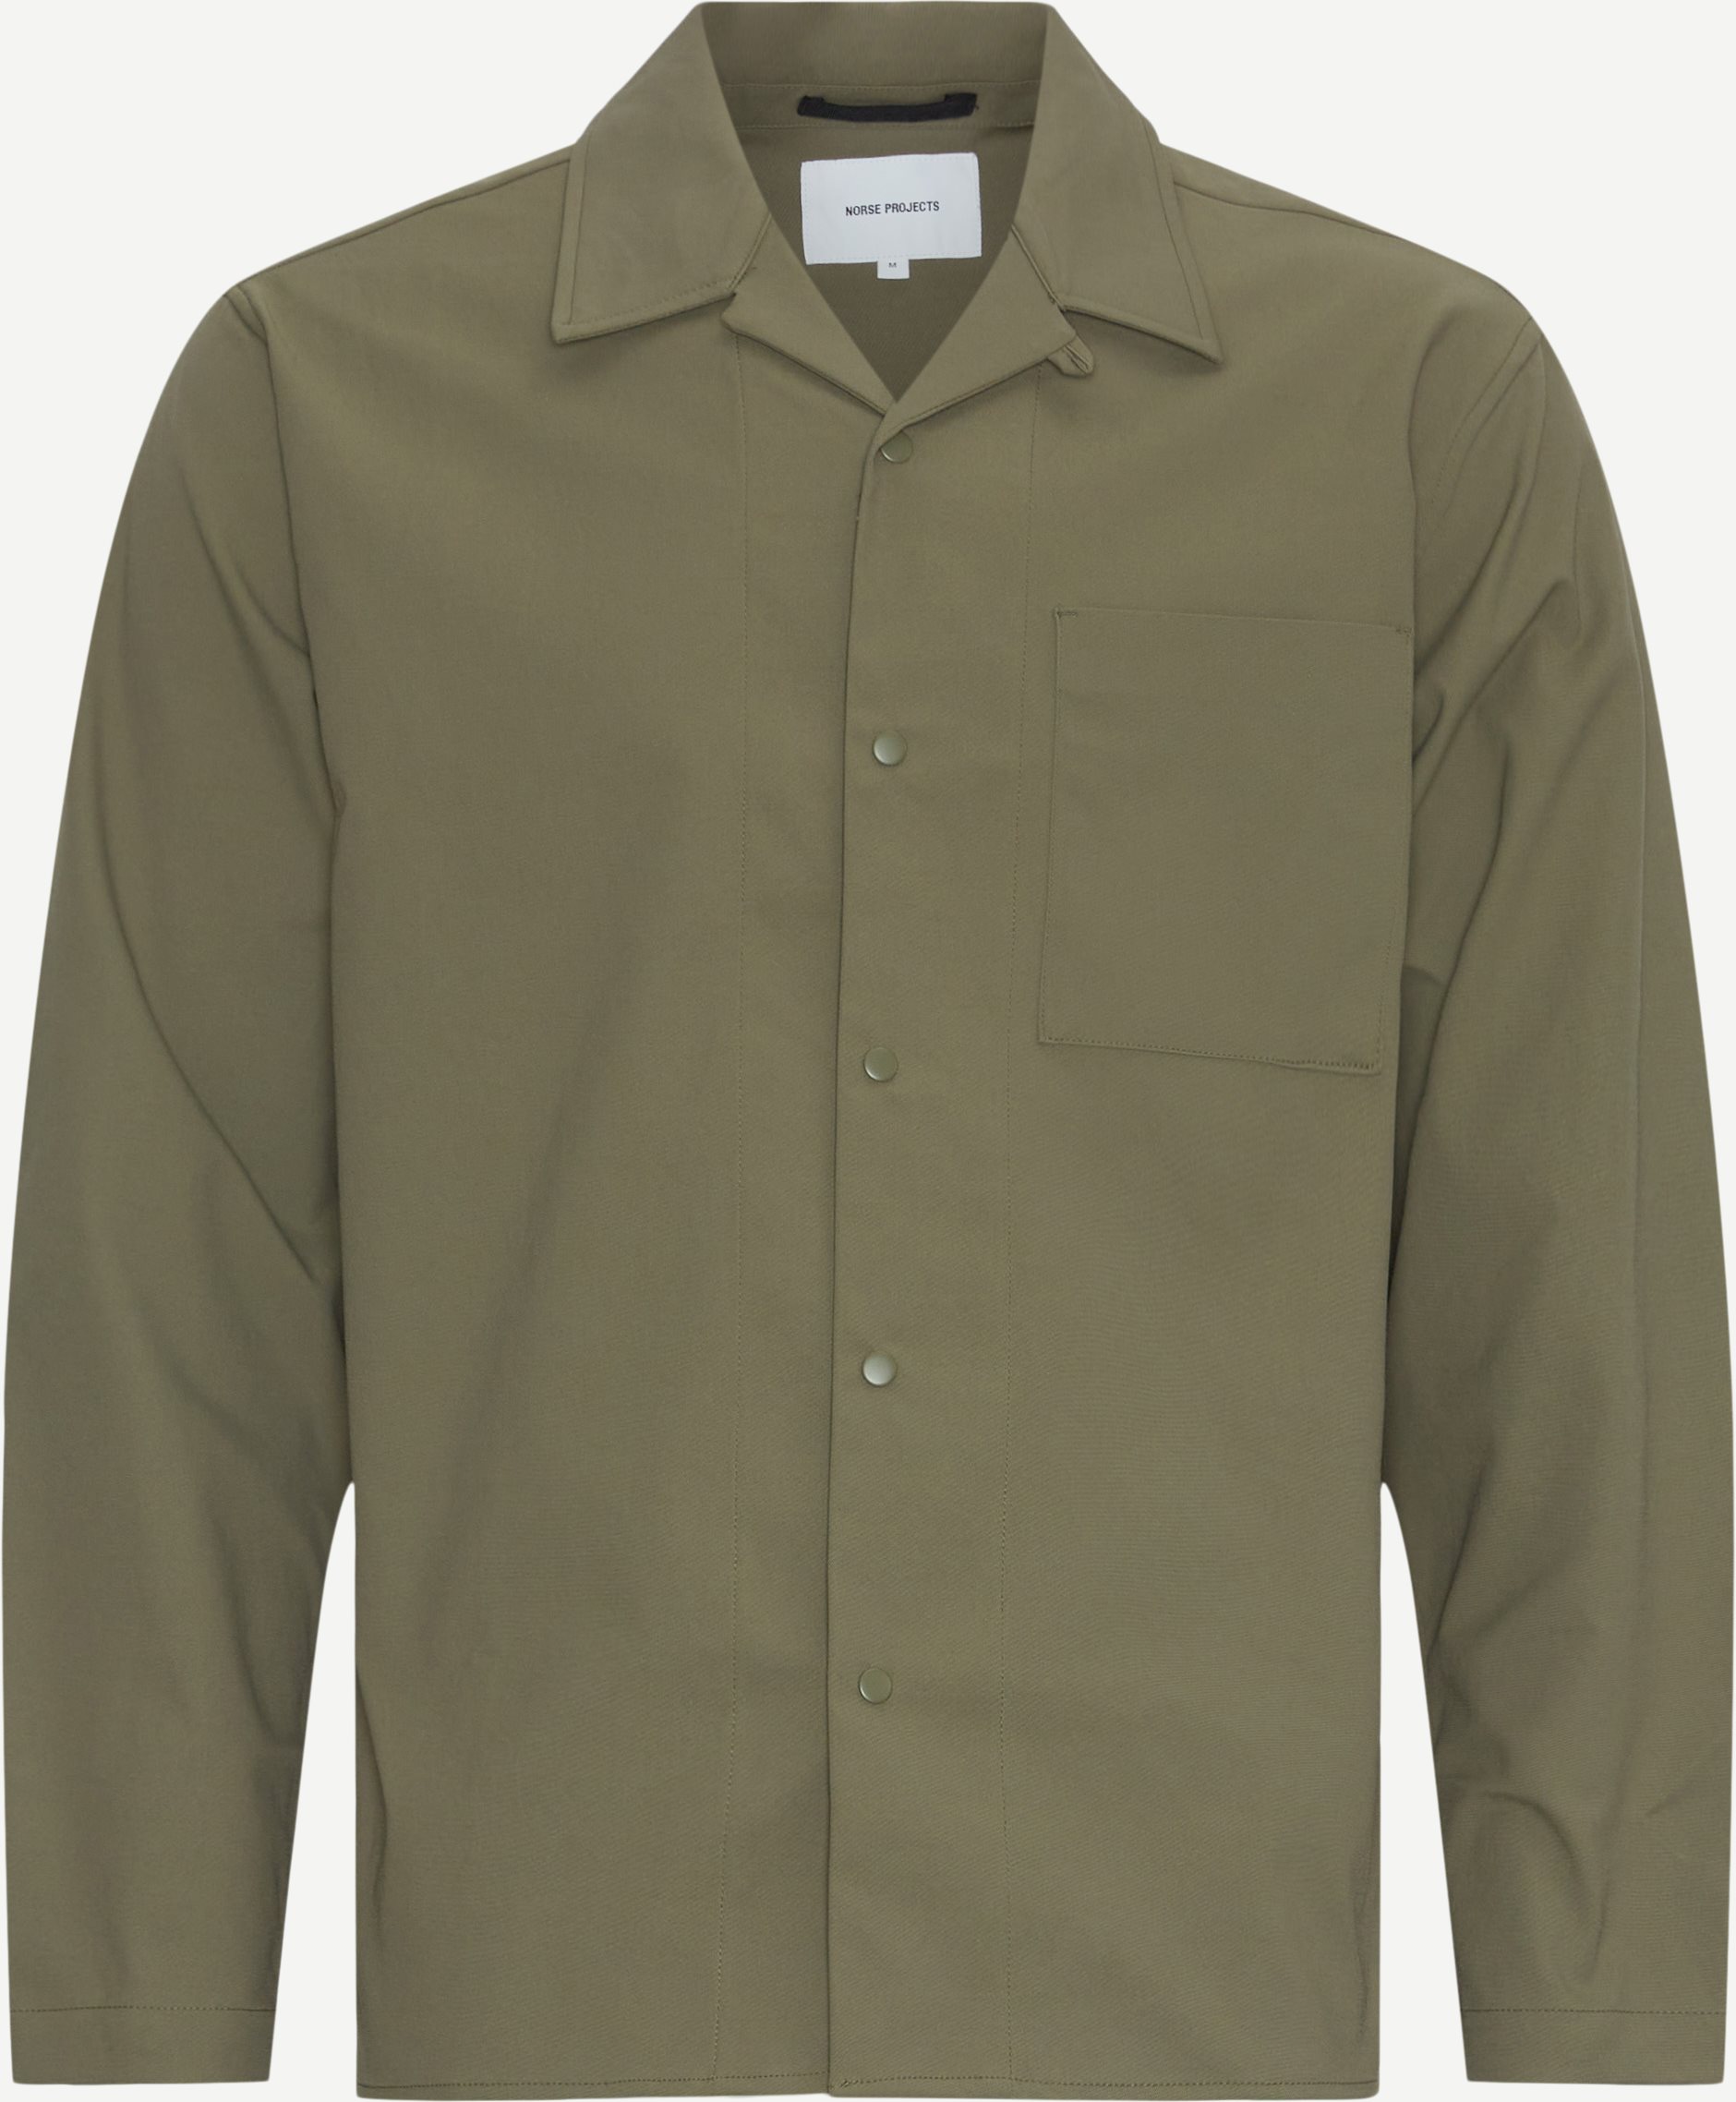 Norse Projects Skjorter CARSTEN SOLOTEX TWILL SHIRT N40-0789 2401 Army